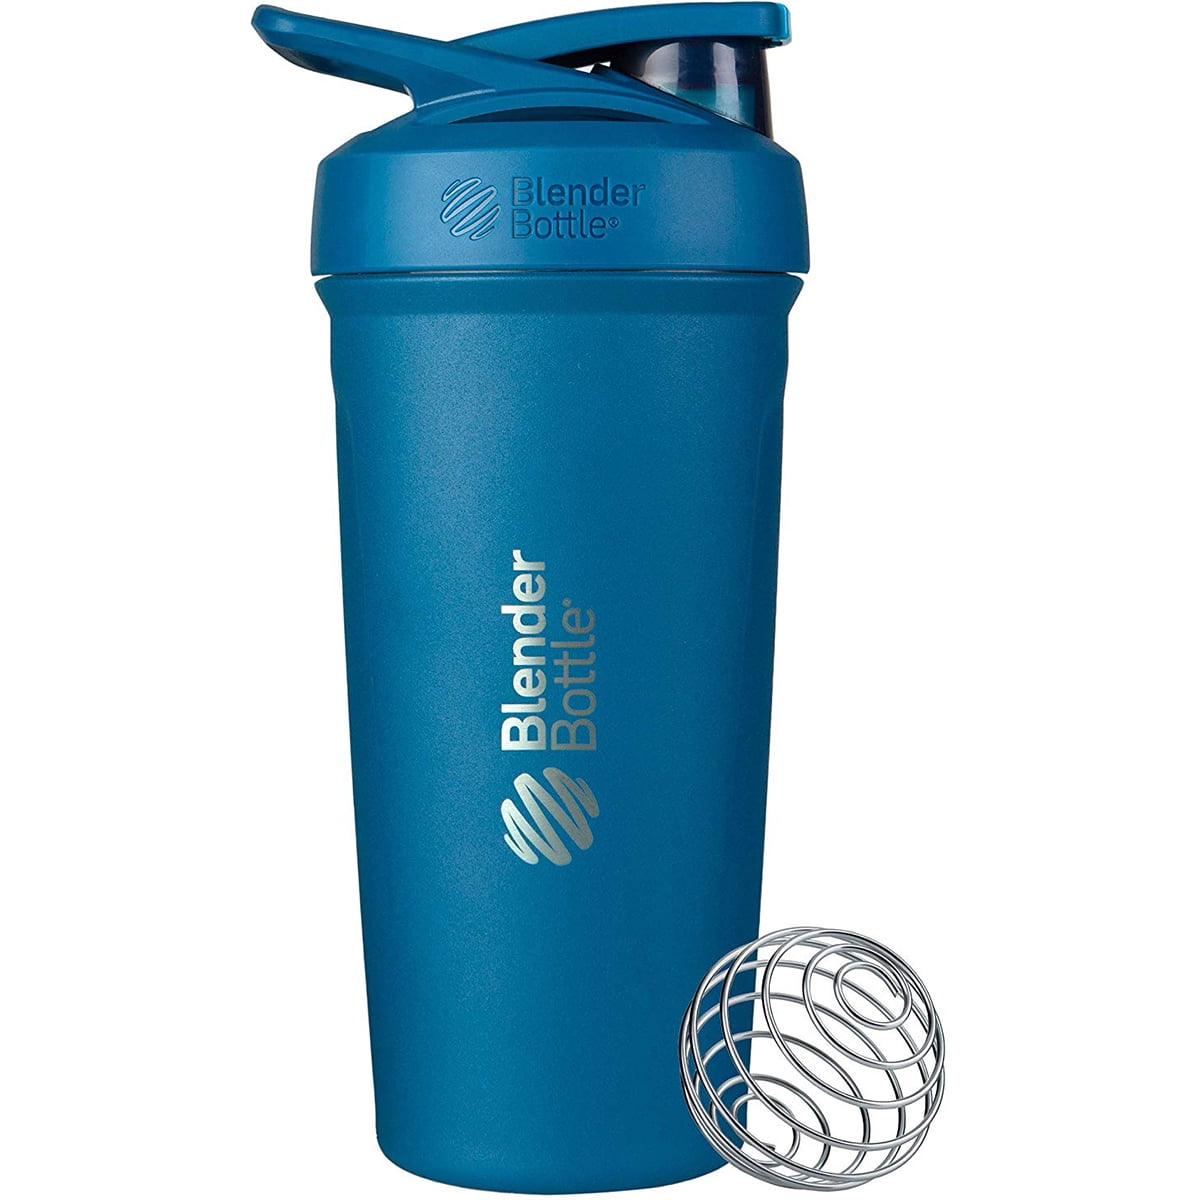 BlenderBottle Strada Shaker Cup Perfect for Protein Shakes and Pre Workout, 24-Ounce, Yellow